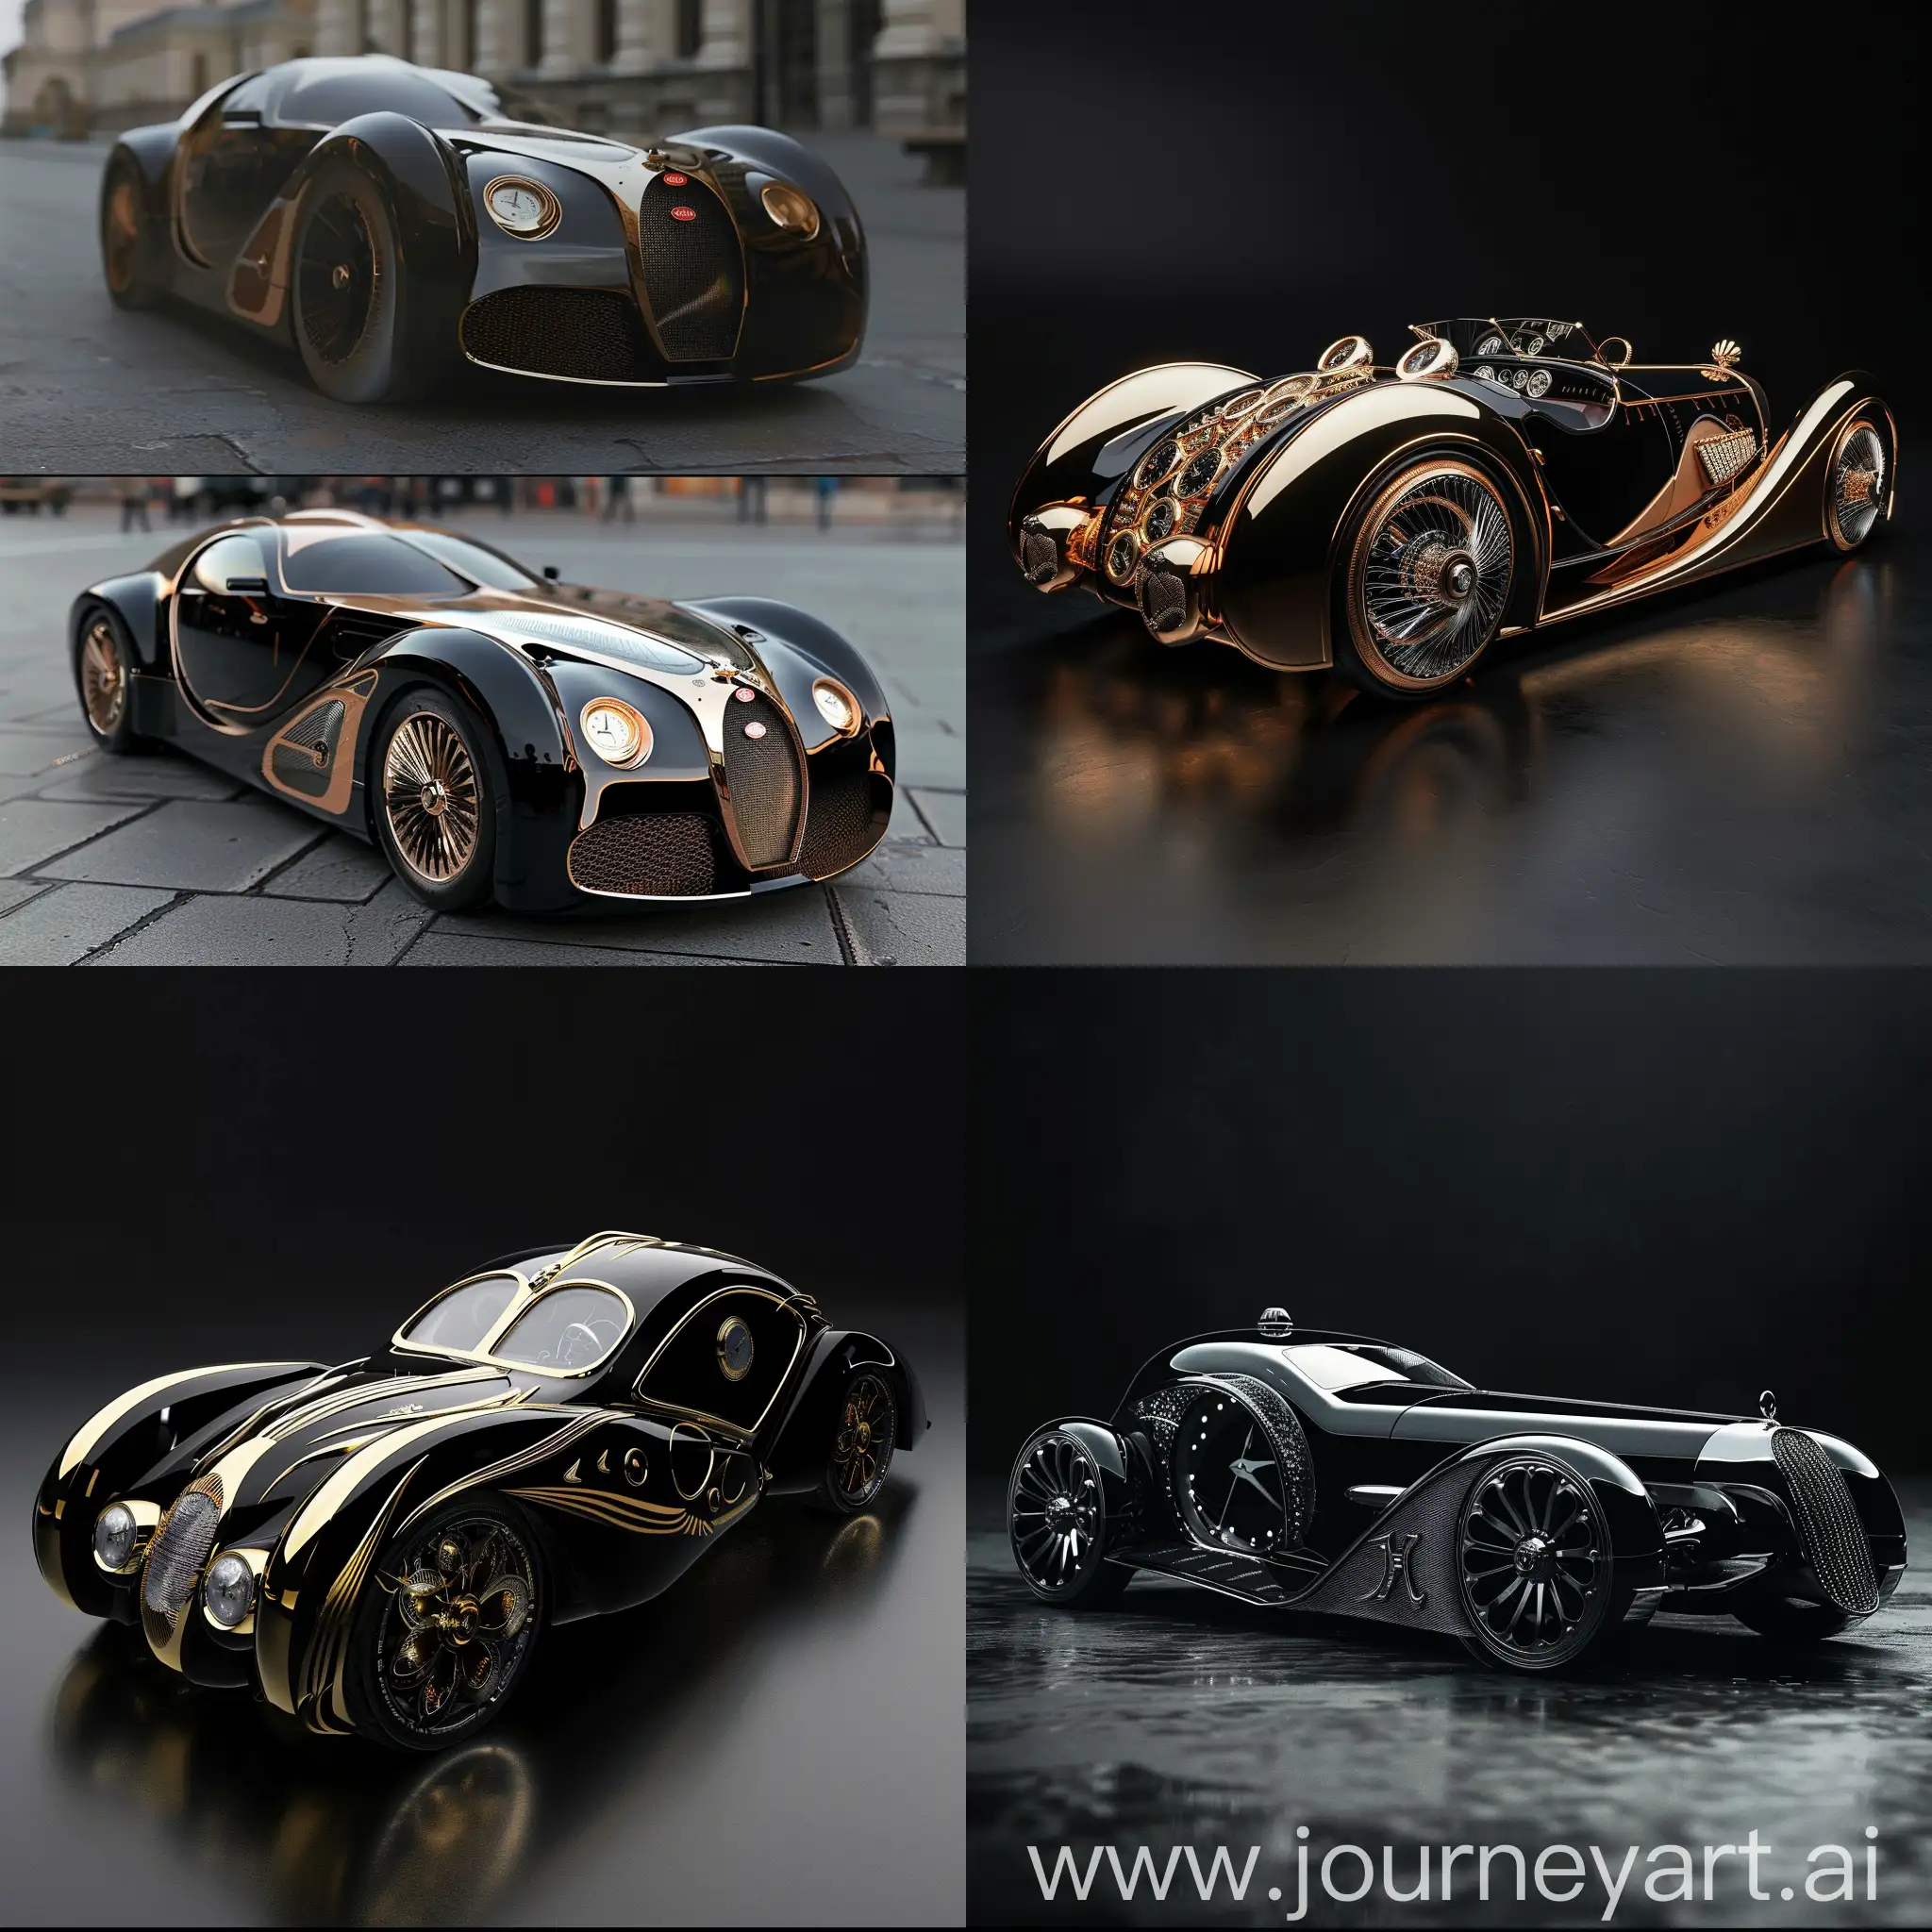 Vintage-Pocket-Watch-Inspired-Car-Design-in-BeauxArts-Style